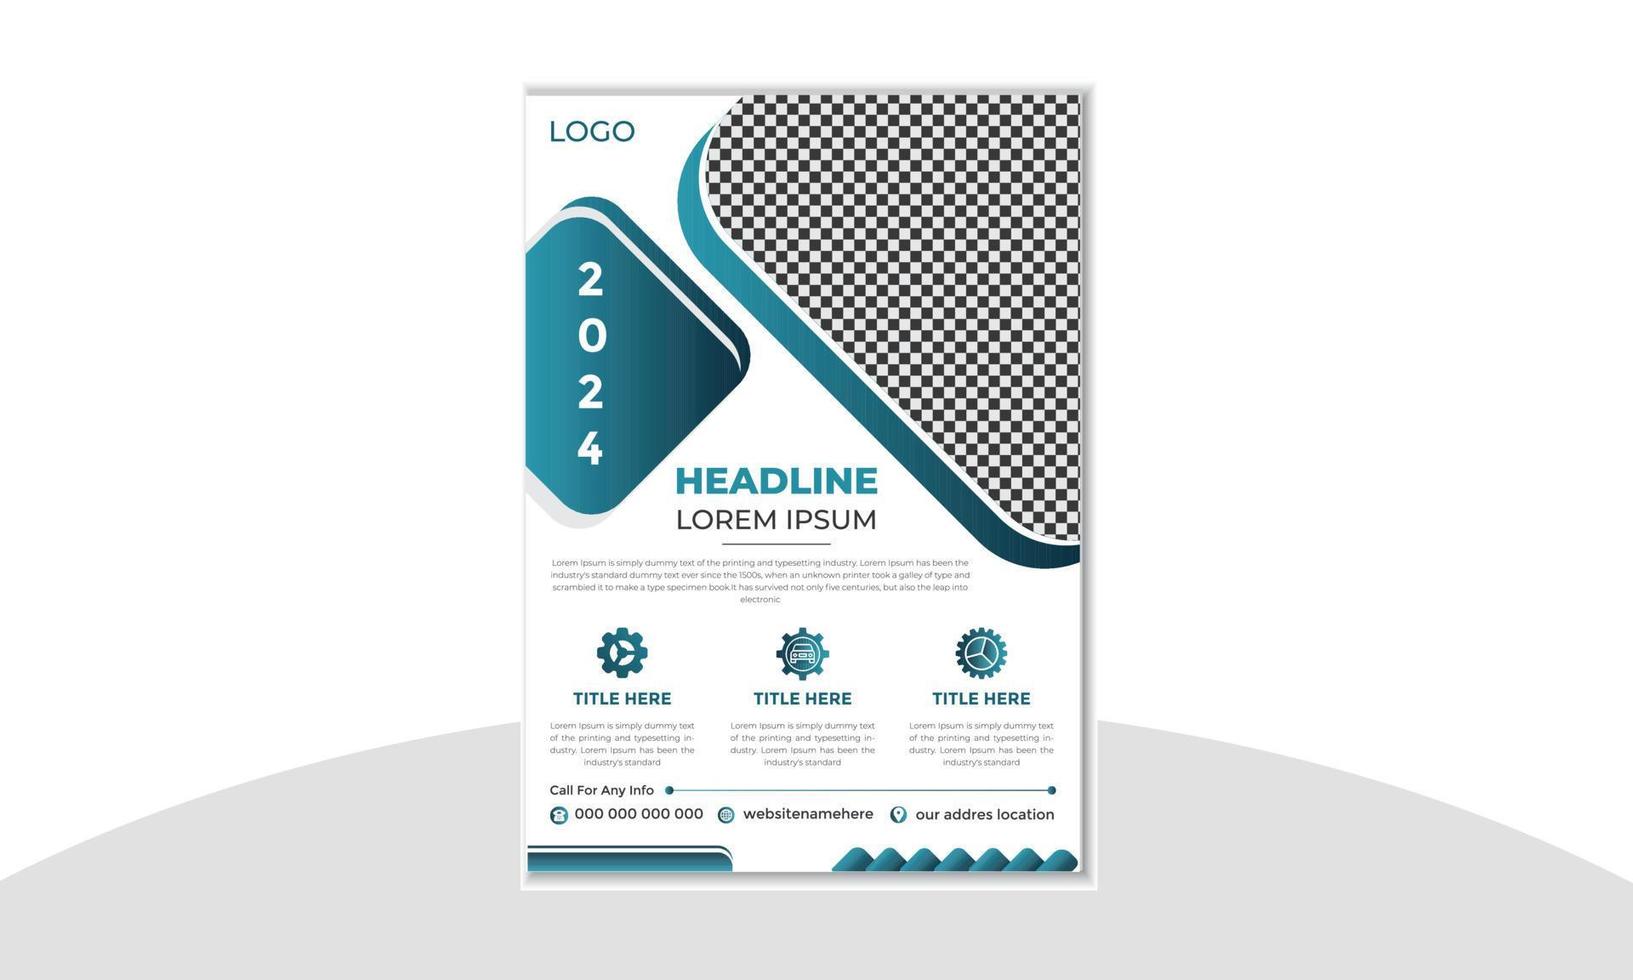 Corporate Business flyer design template. Geometric shape business flyer design layout, business banners, business poster design and leaflets. vector